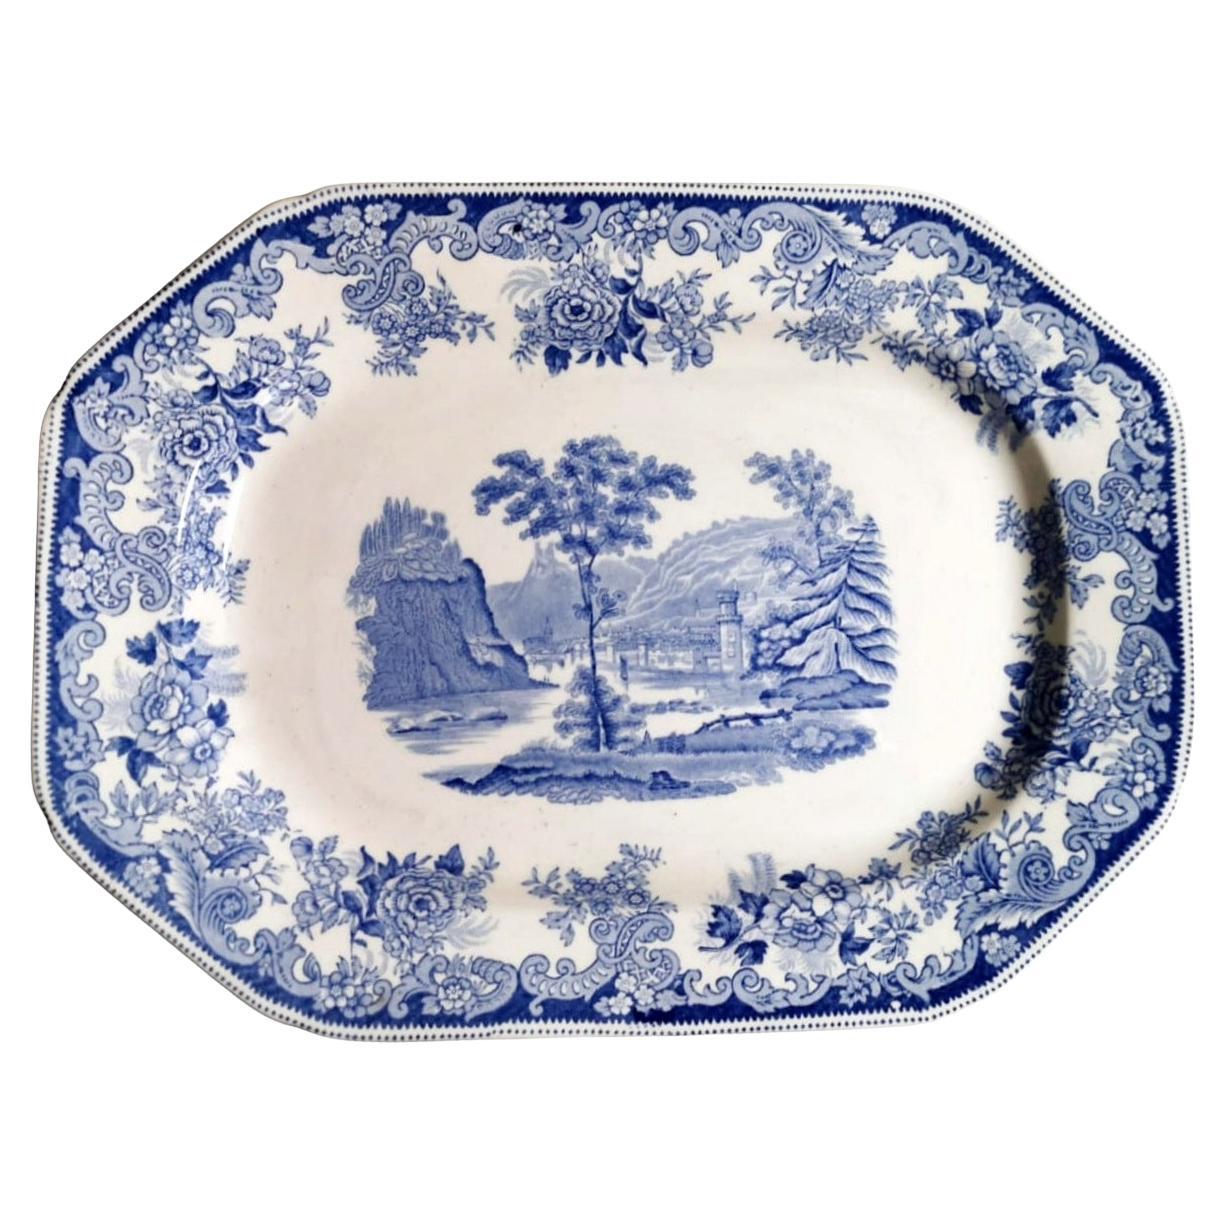 Copeland-Spode English Tray with Blue Transferware Decorations For Sale